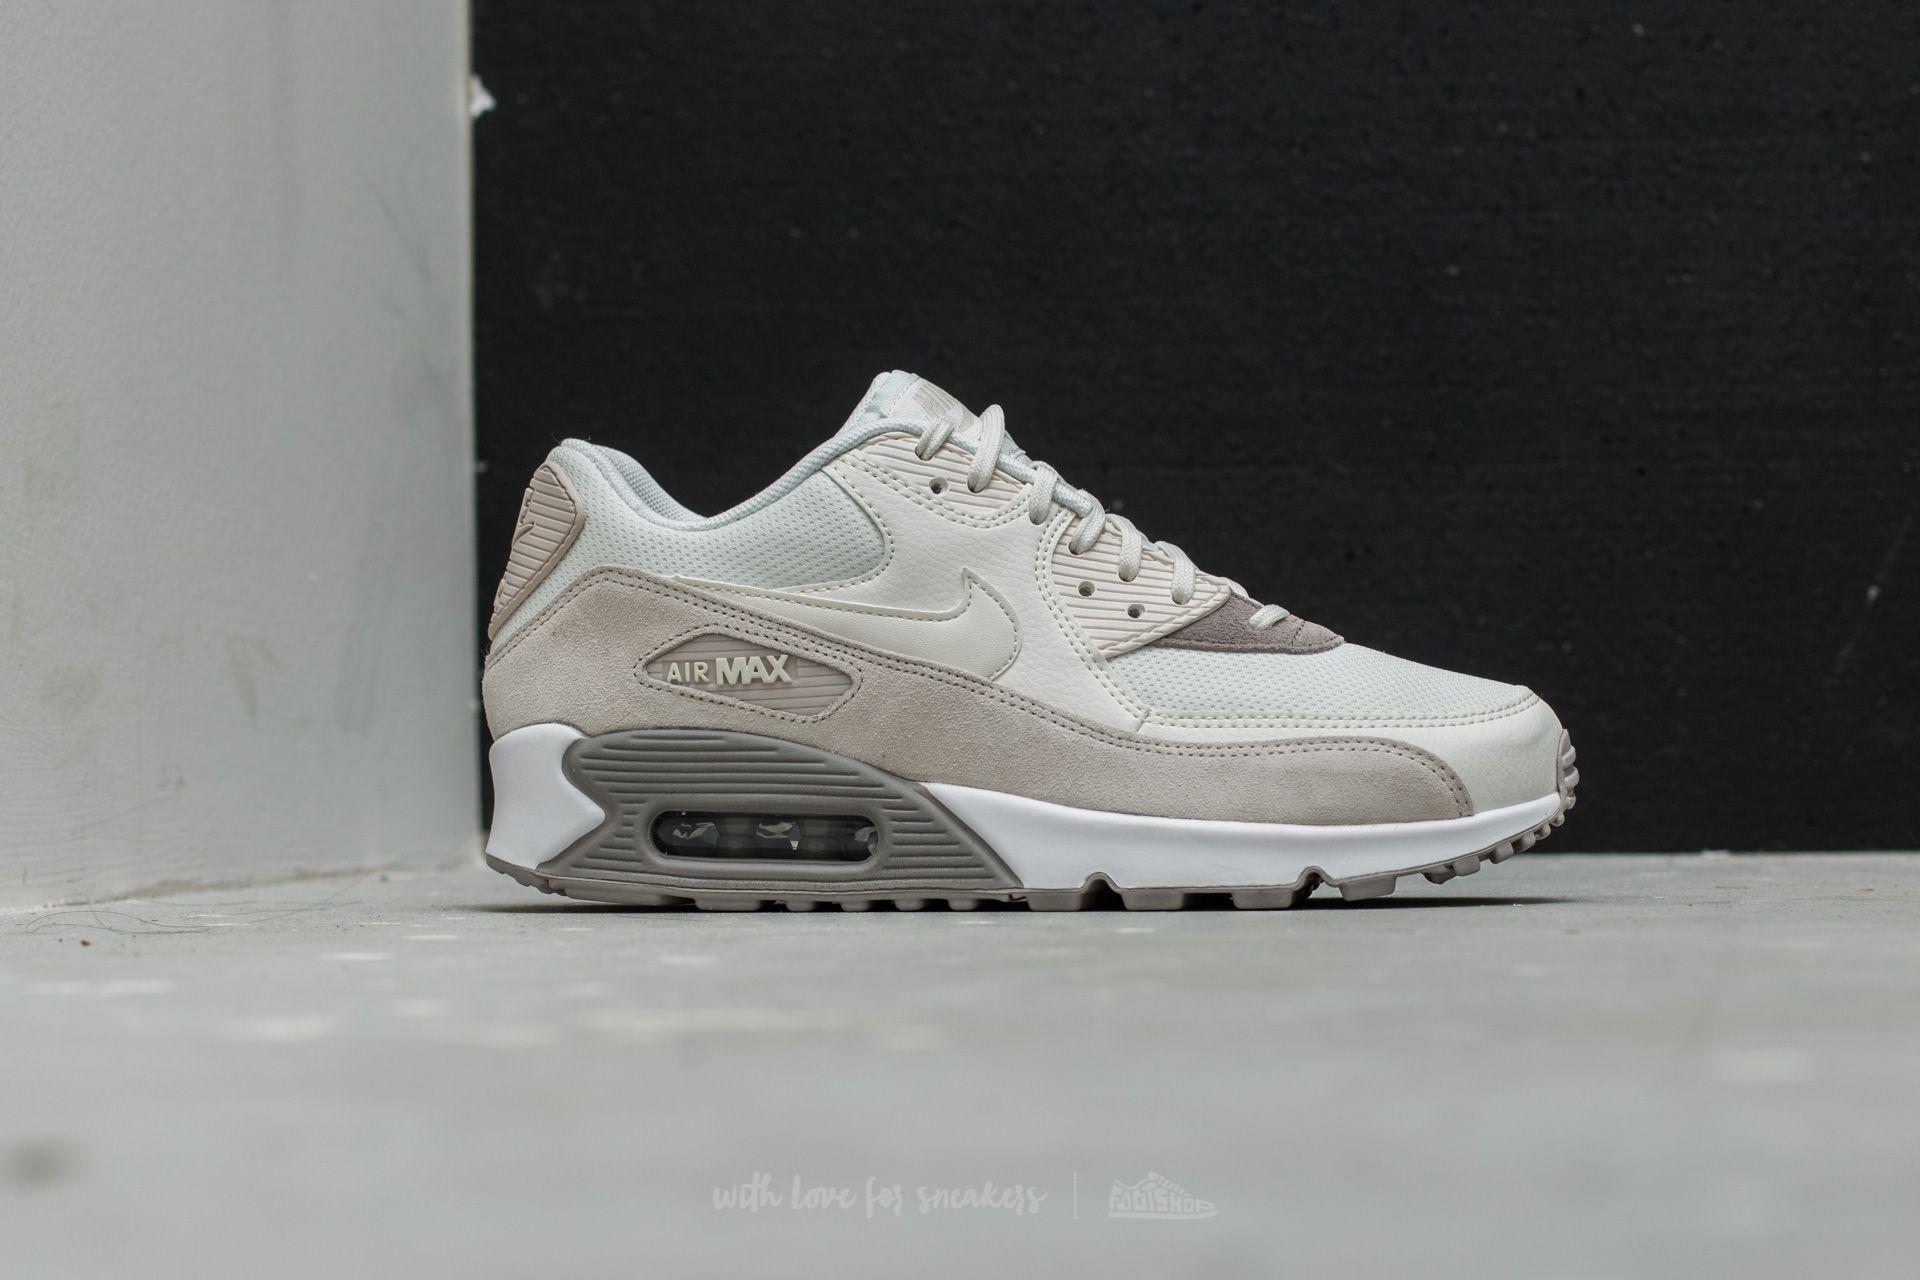 Nike Leather Wmns Air Max 90 Light Orewood Brown/ Sail | Lyst